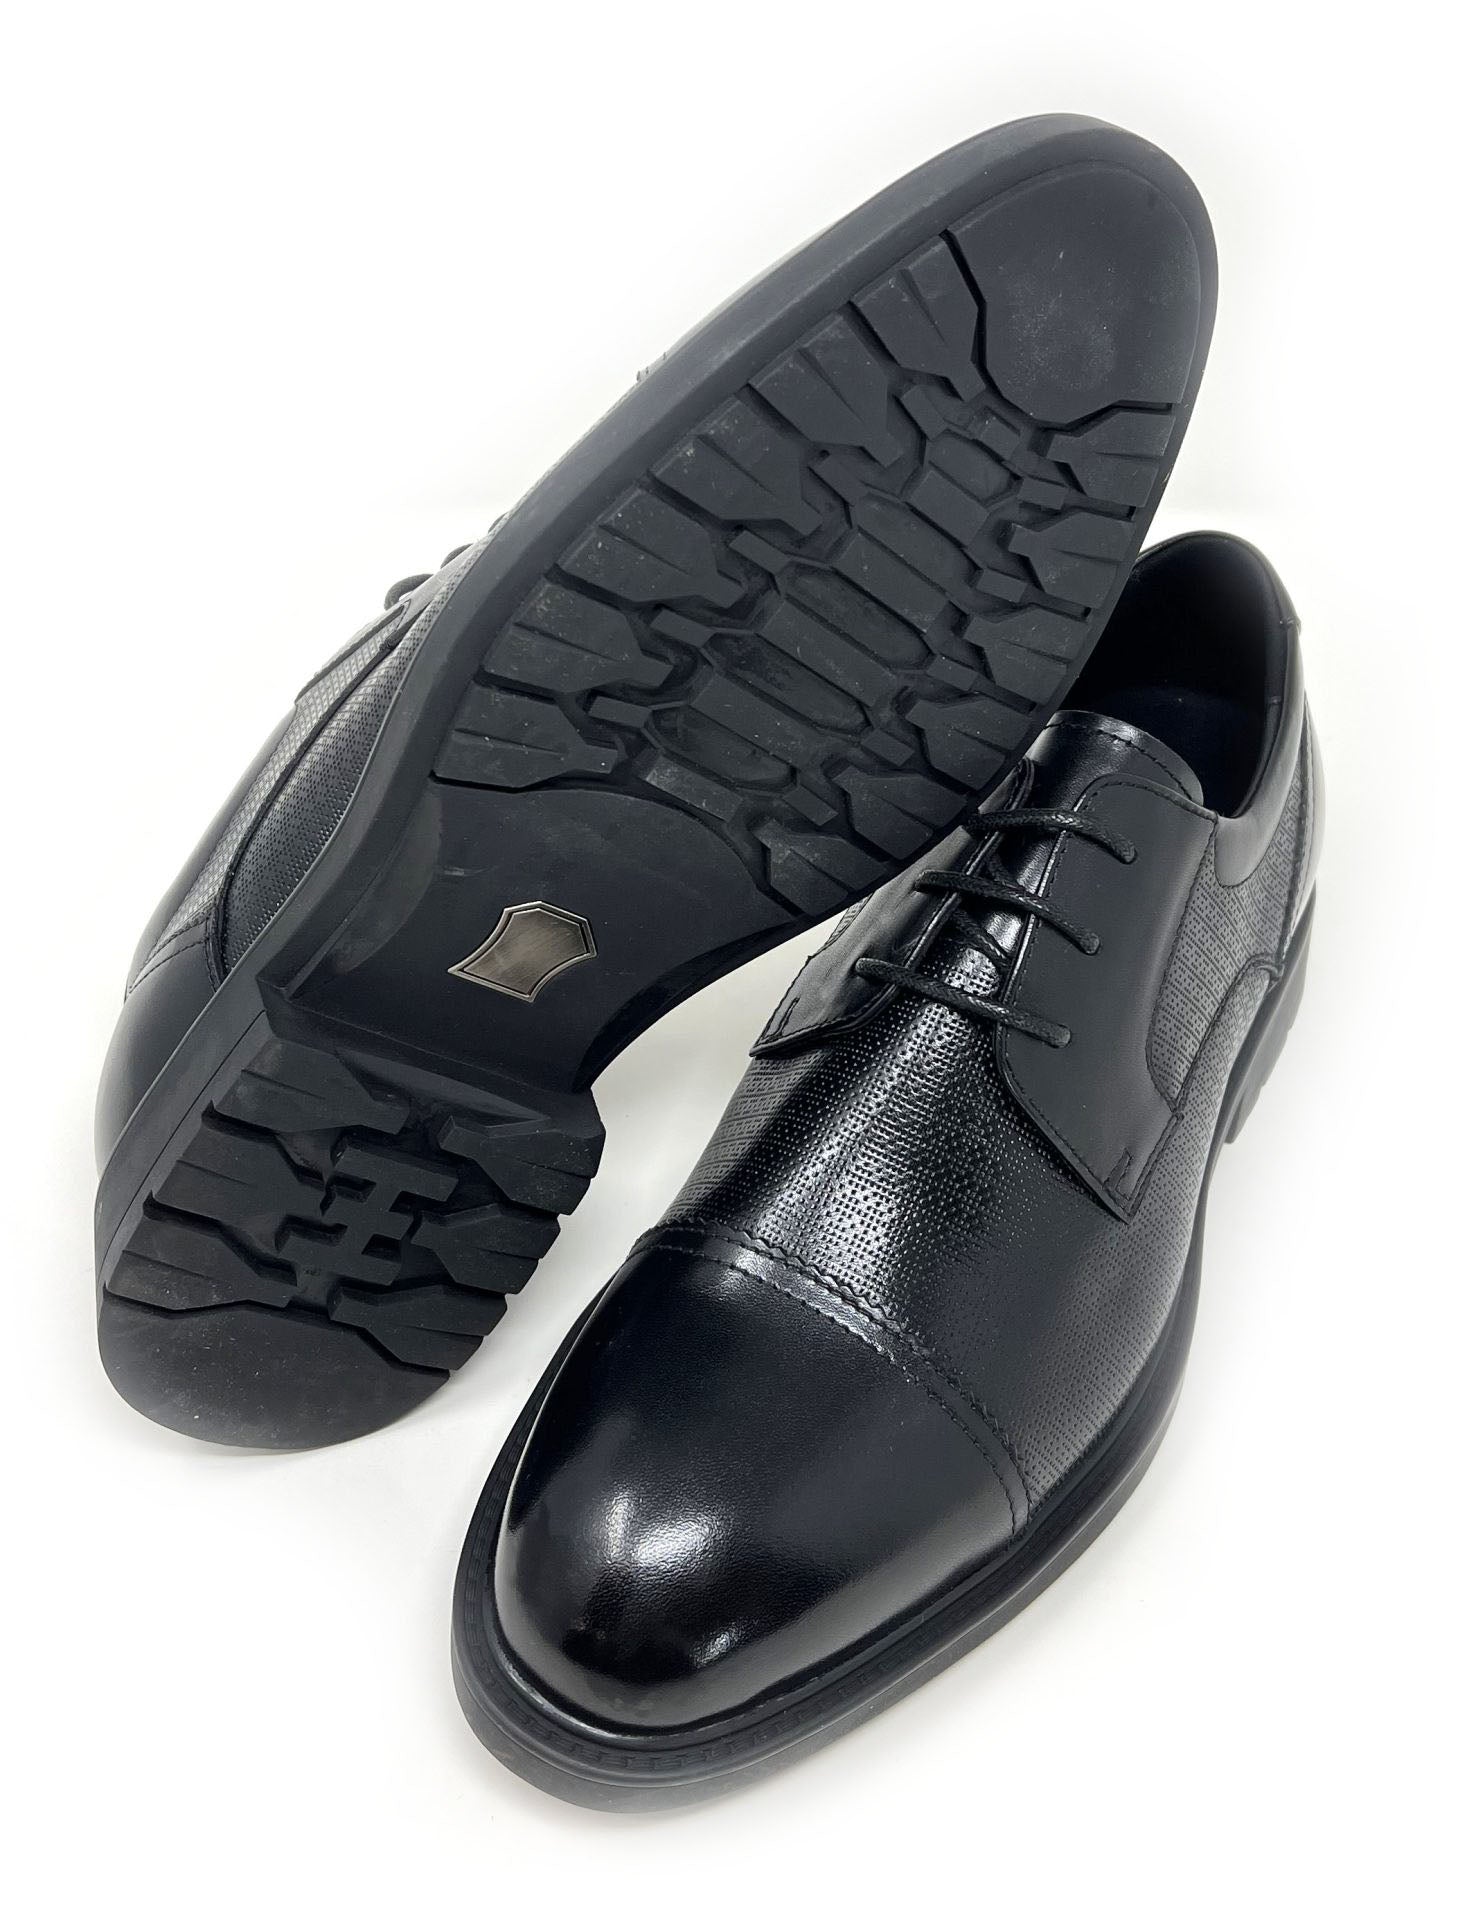 FSM0059 - 2.4 Inches Taller (Black) - Size 7.5 Only